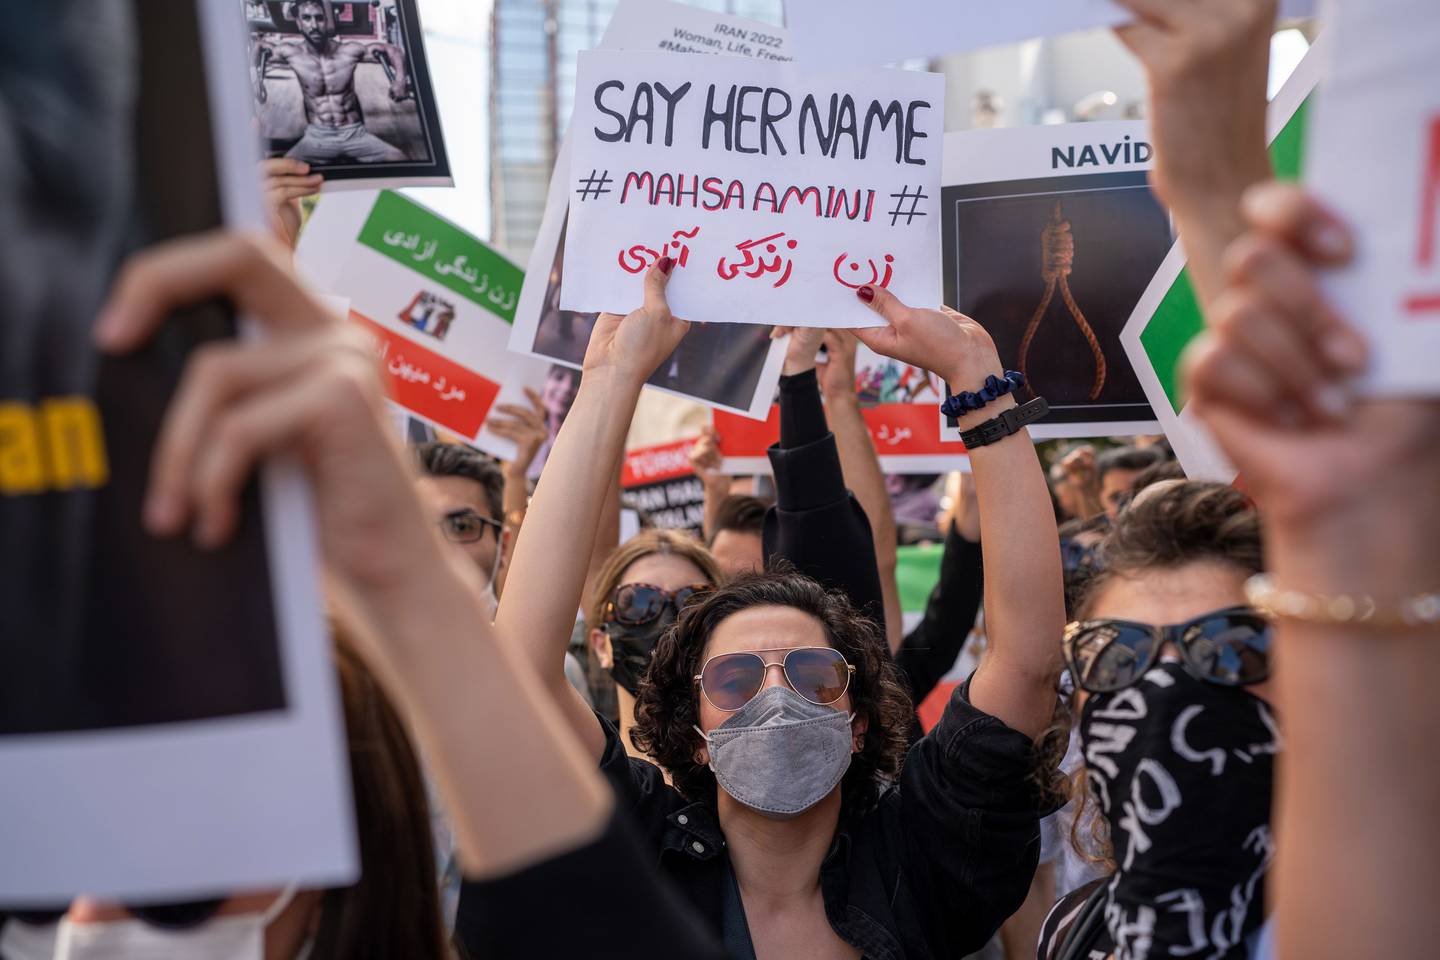 A protester wearing a face mask holds a placard reading 'Say Her Name' during a demonstration over the death of Mahsa Amini, outside the Iranian consulate building in Istanbul, Turkey, on Thursday, Sept. 29, 2022. Protesters in Iran and other countries are mobilizing to show their anger goes far beyond the tragic death of Amini, the 22-year-old woman who died in mid-September after being in the custody of the country's morality police. Photographer: Erhan Demirtas/Bloomberg